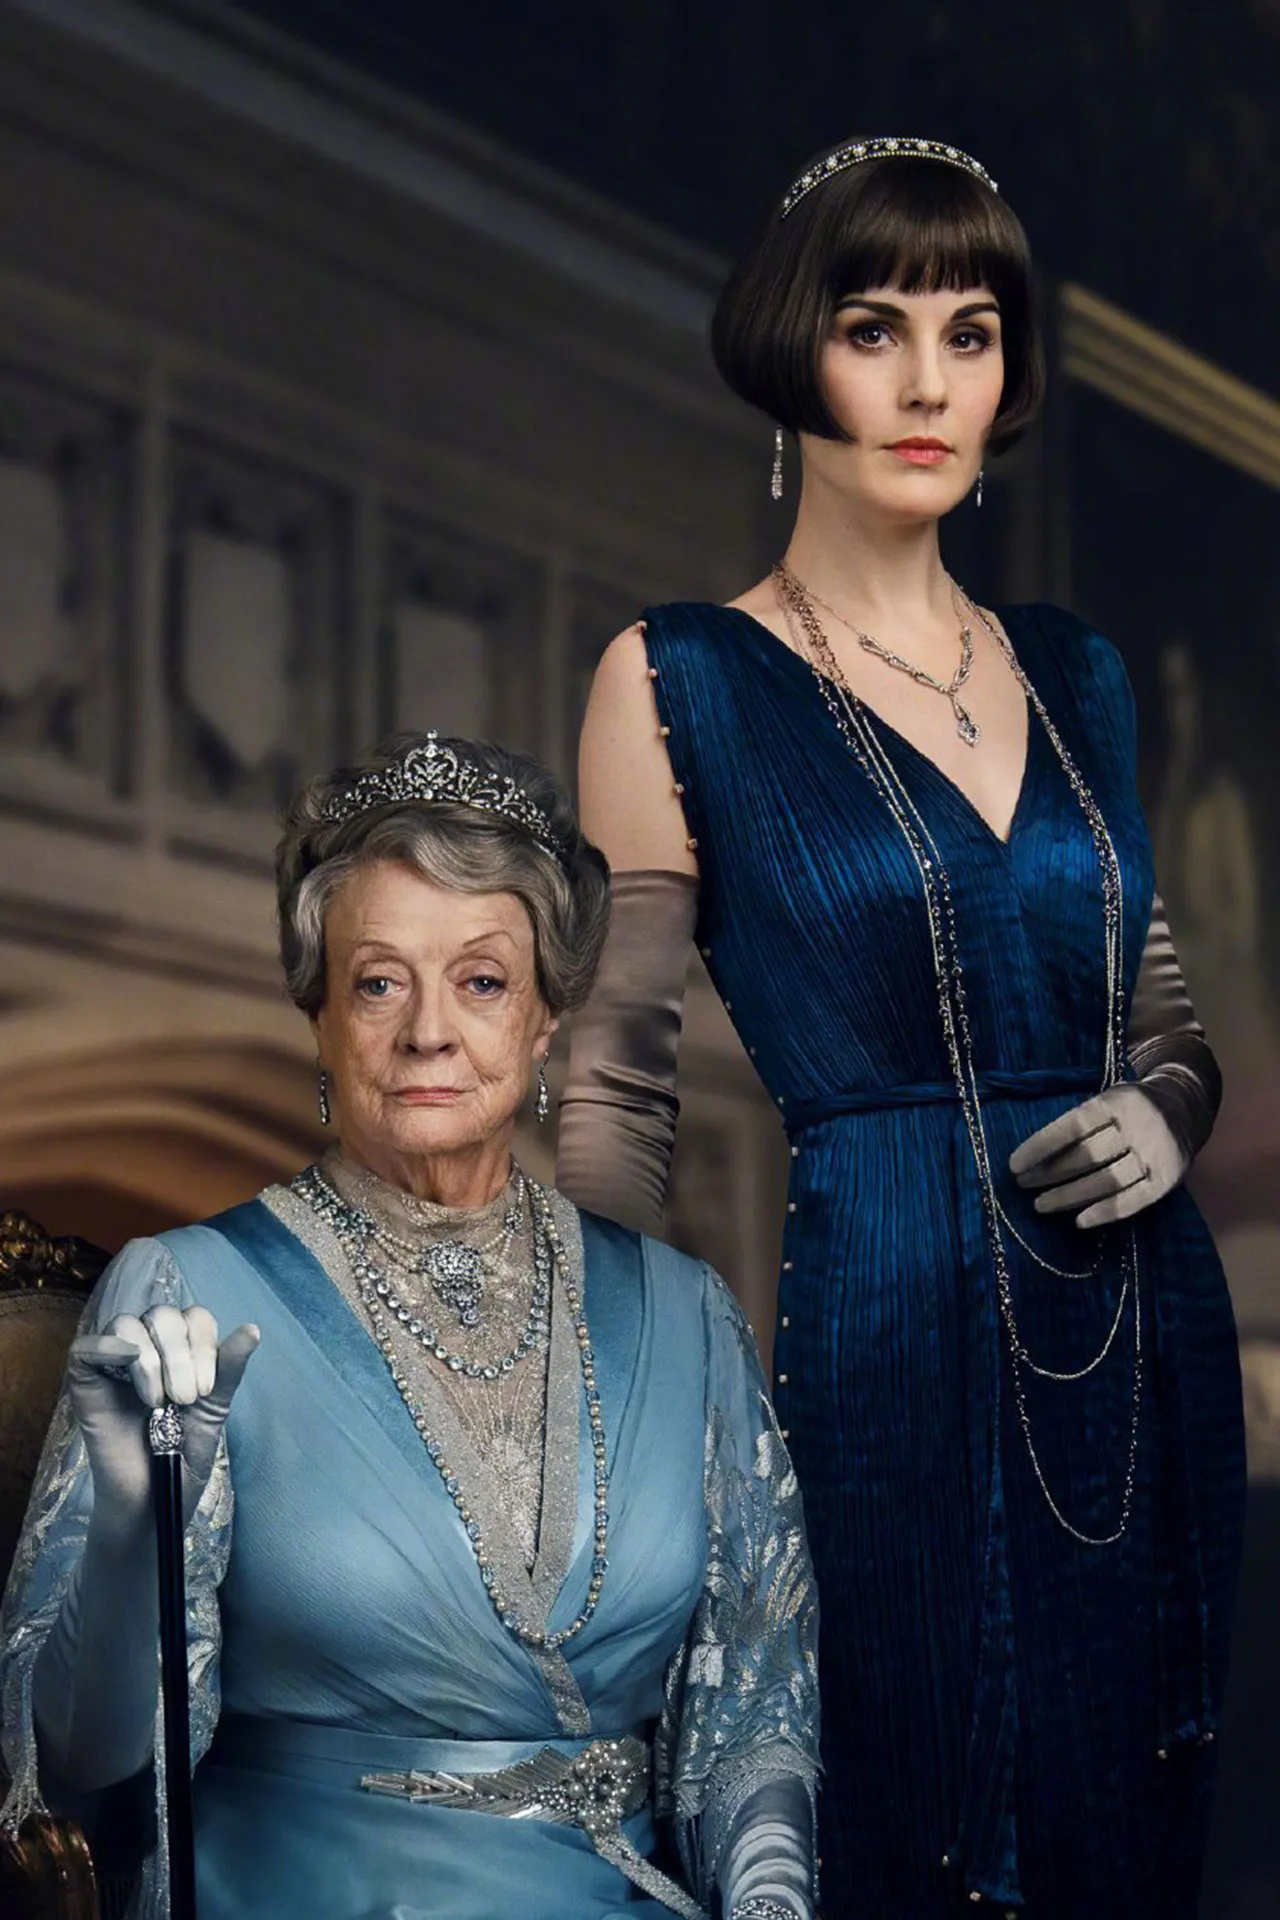 Michelle Dockery: Dame Maggie Smith as Violet Crawley, The Bentley Skinner Tiaras, The Downton Abbey. 1280x1920 HD Background.